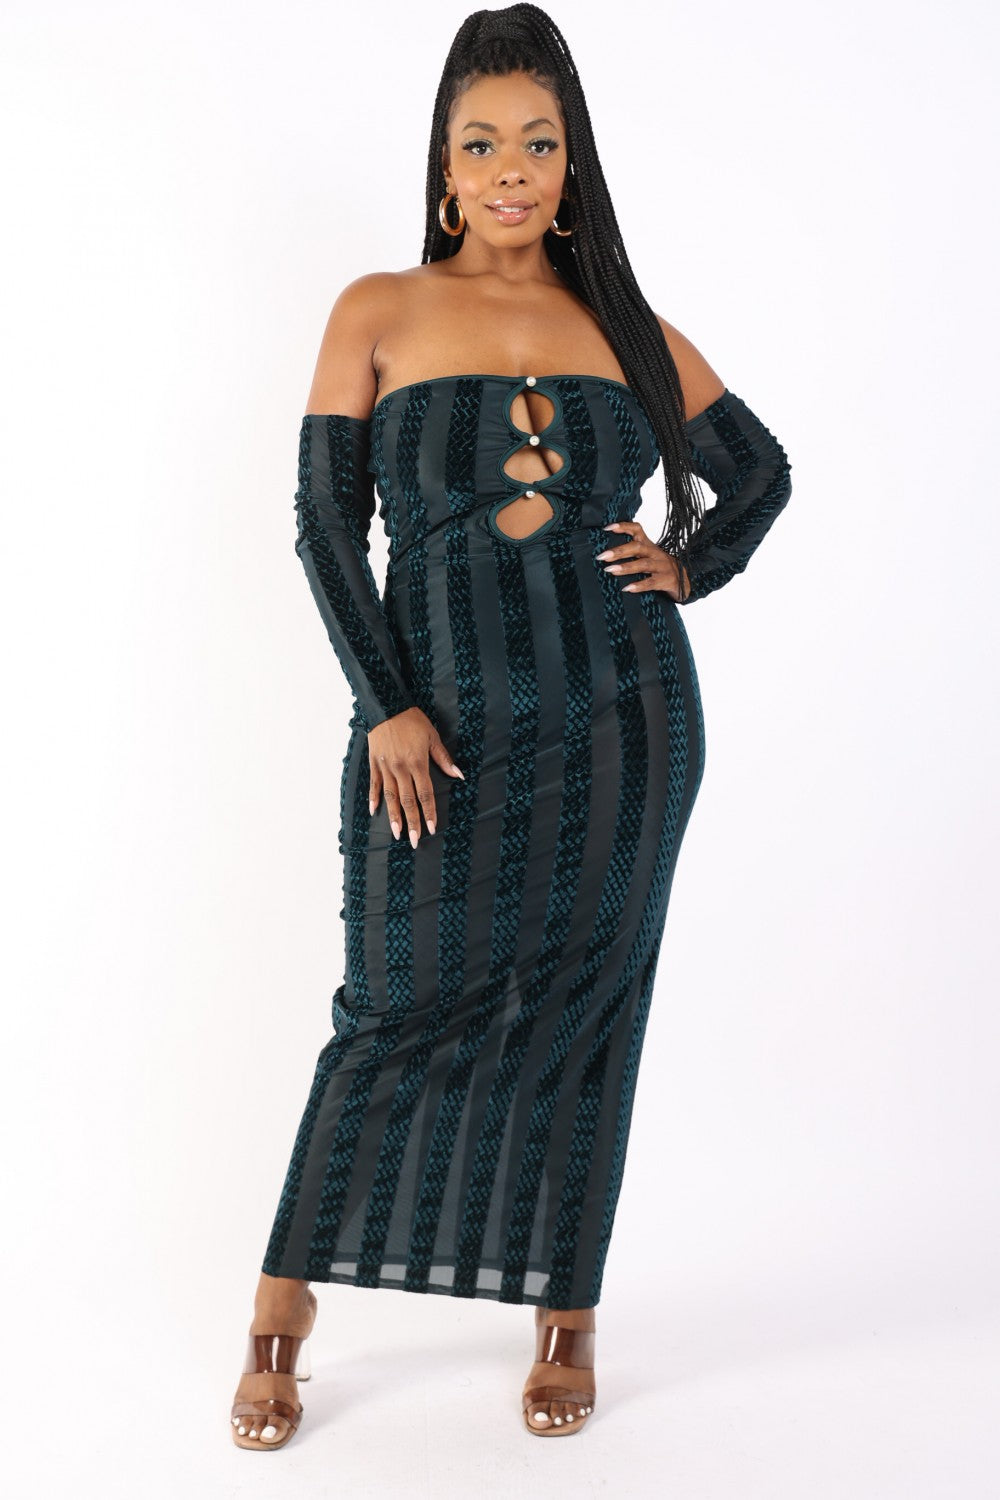 Hunter Off The Shoulder Striped Velvet Maxi Dress - Shopping Therapy 2XL Maxi Dresses